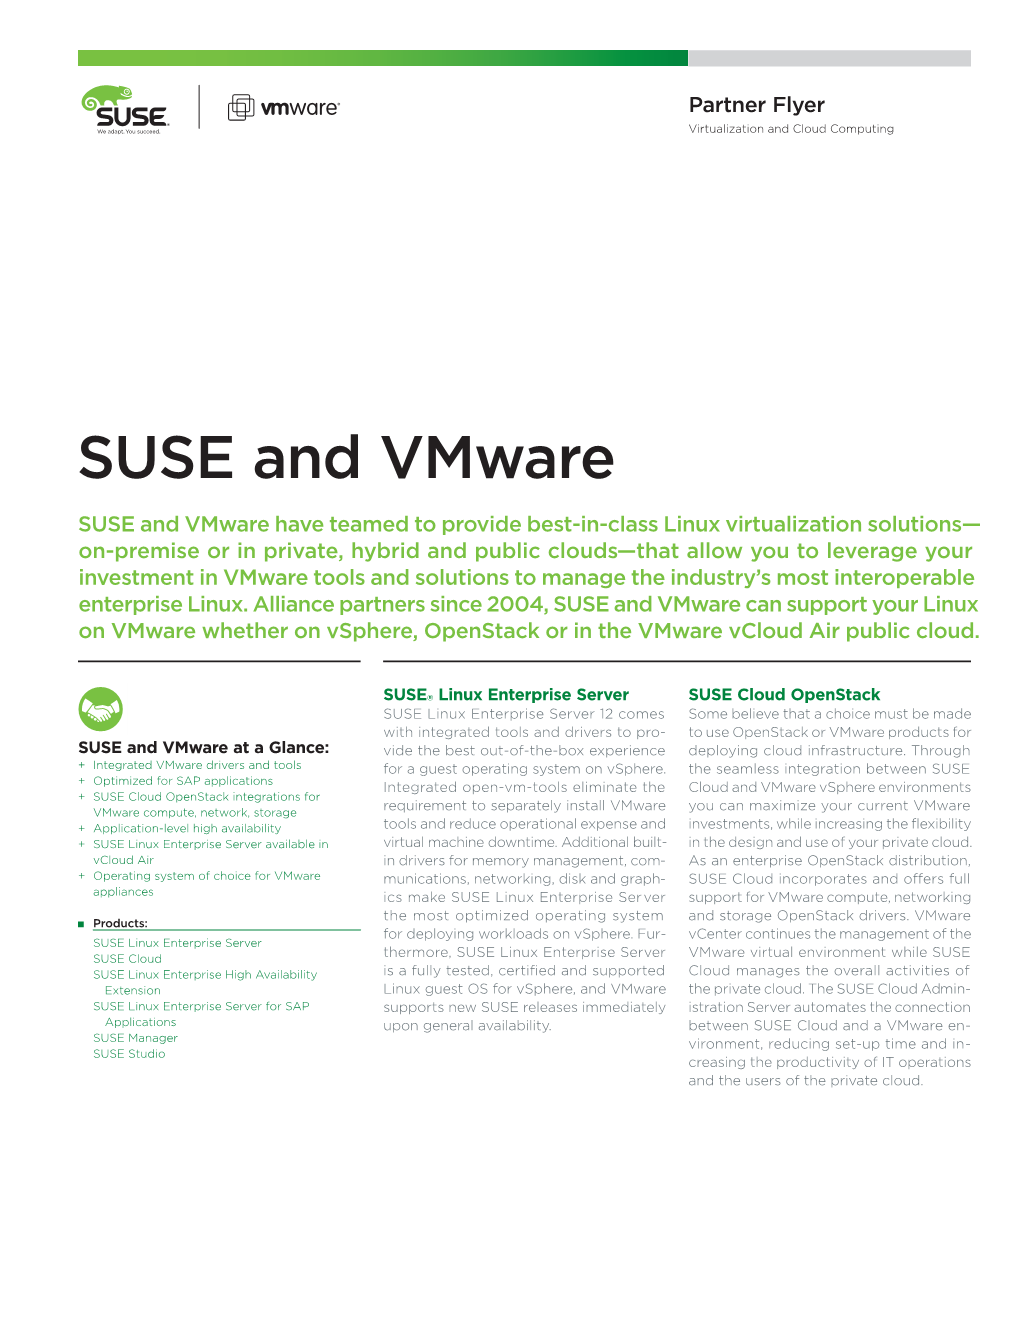 SUSE and Vmware